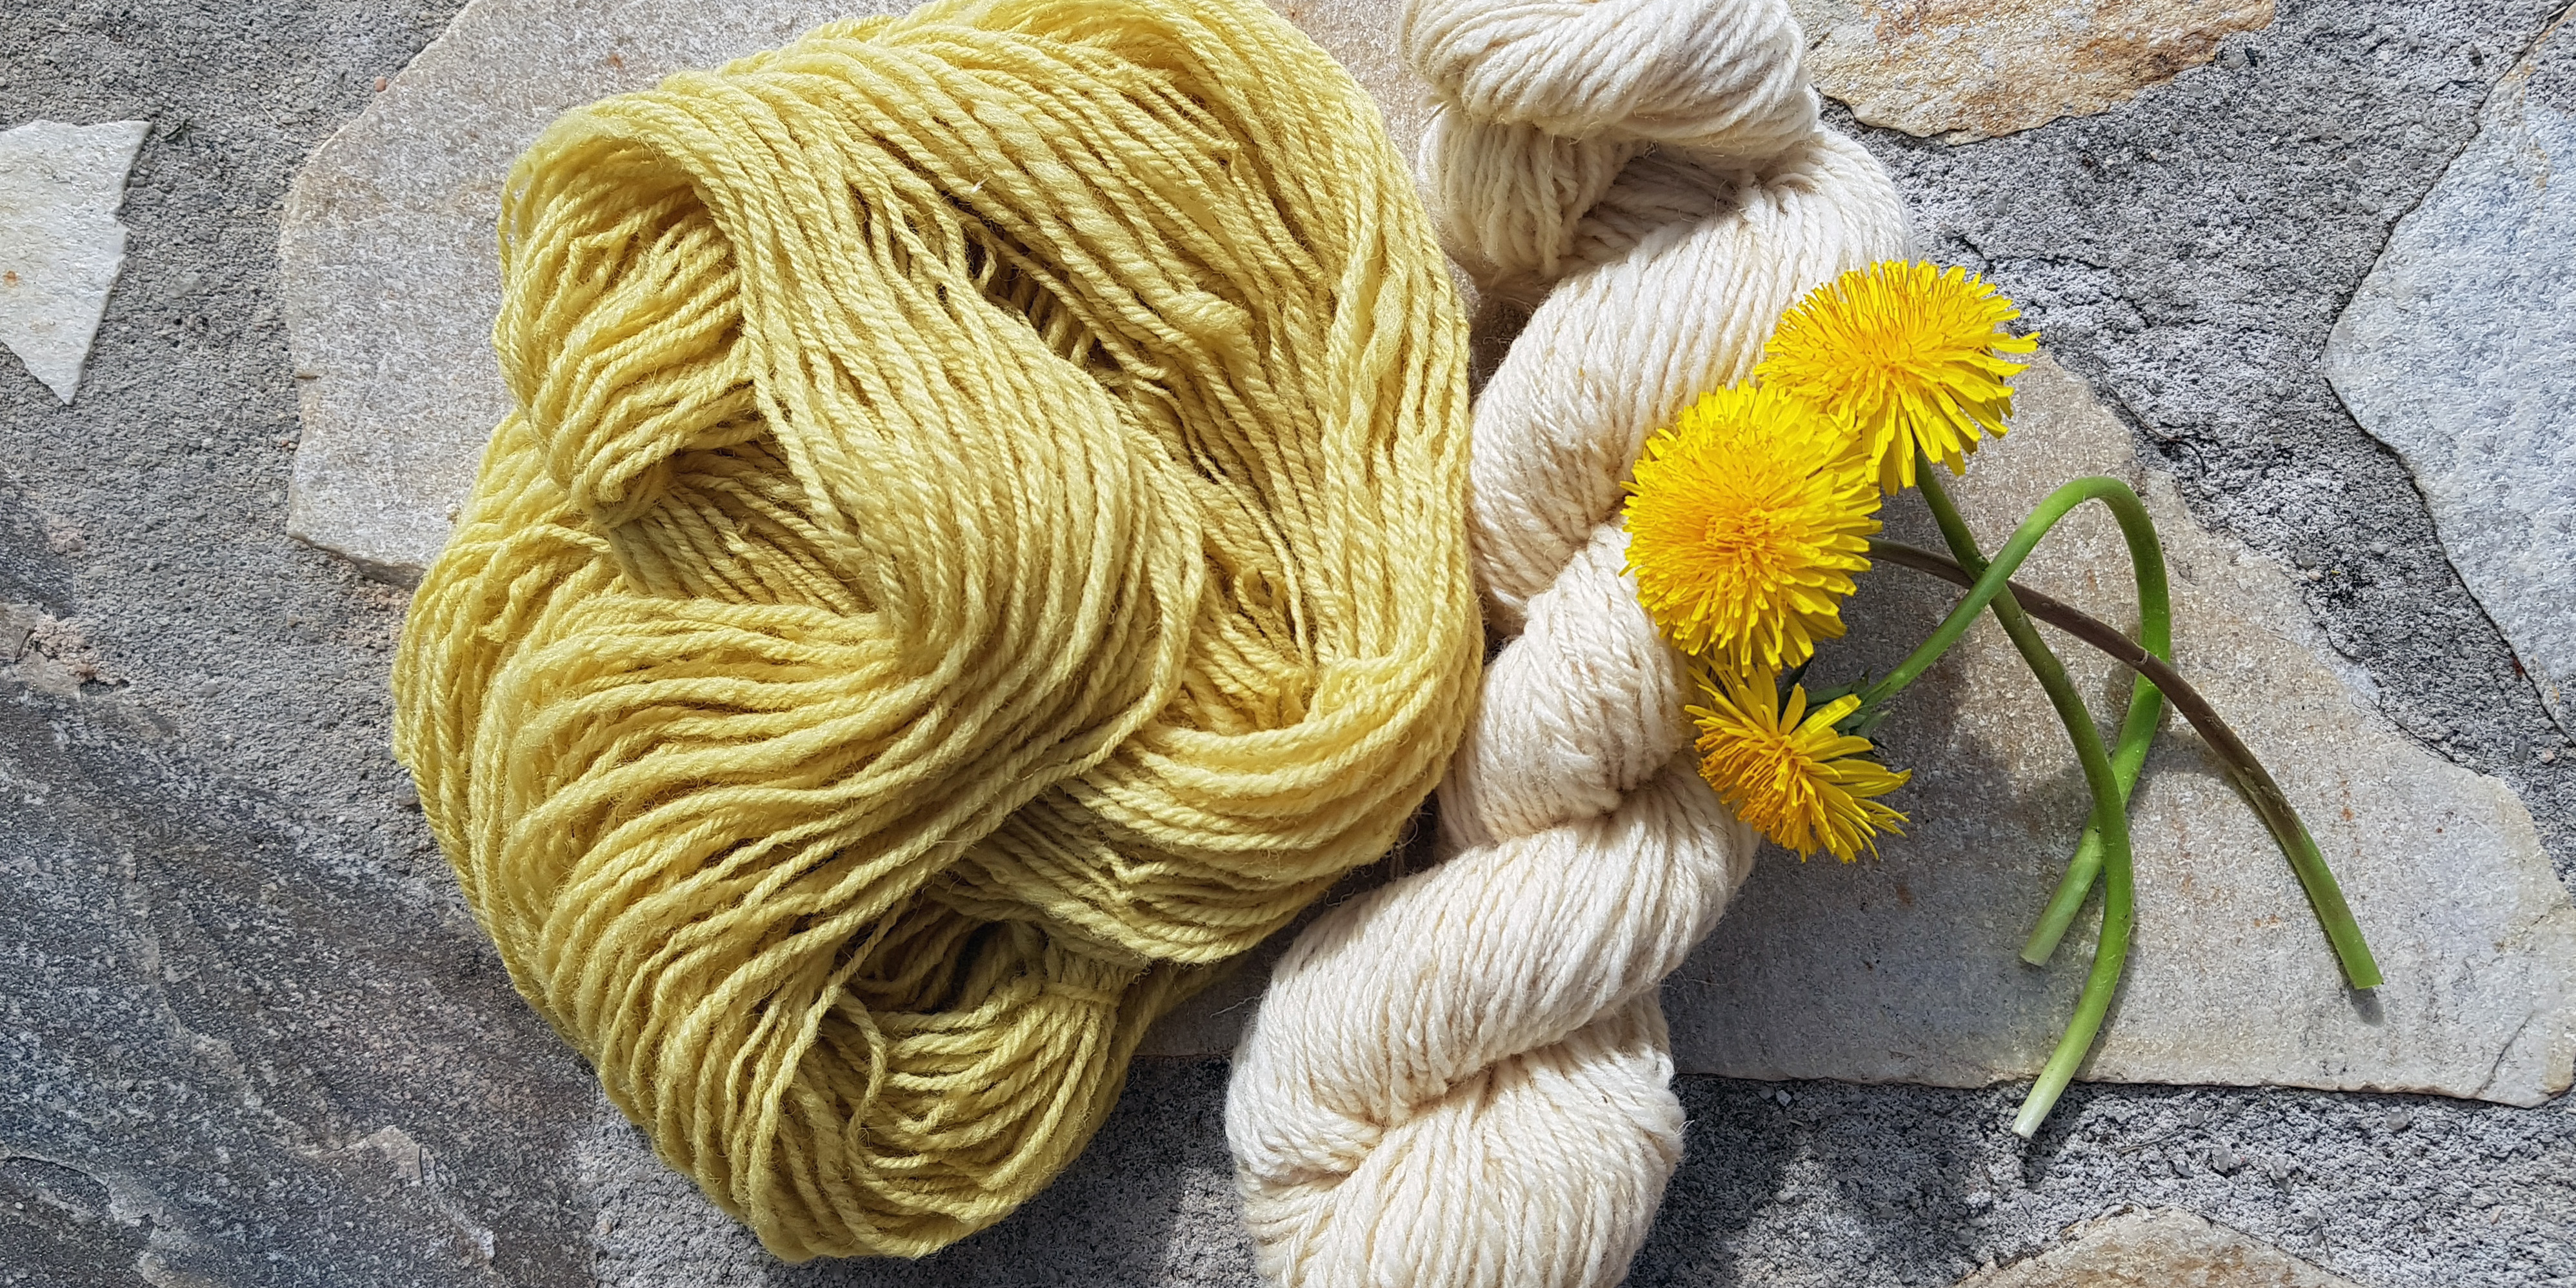 Natural Yellow Dyes for Yarn and Fabric - Rosemary And Pines Fiber